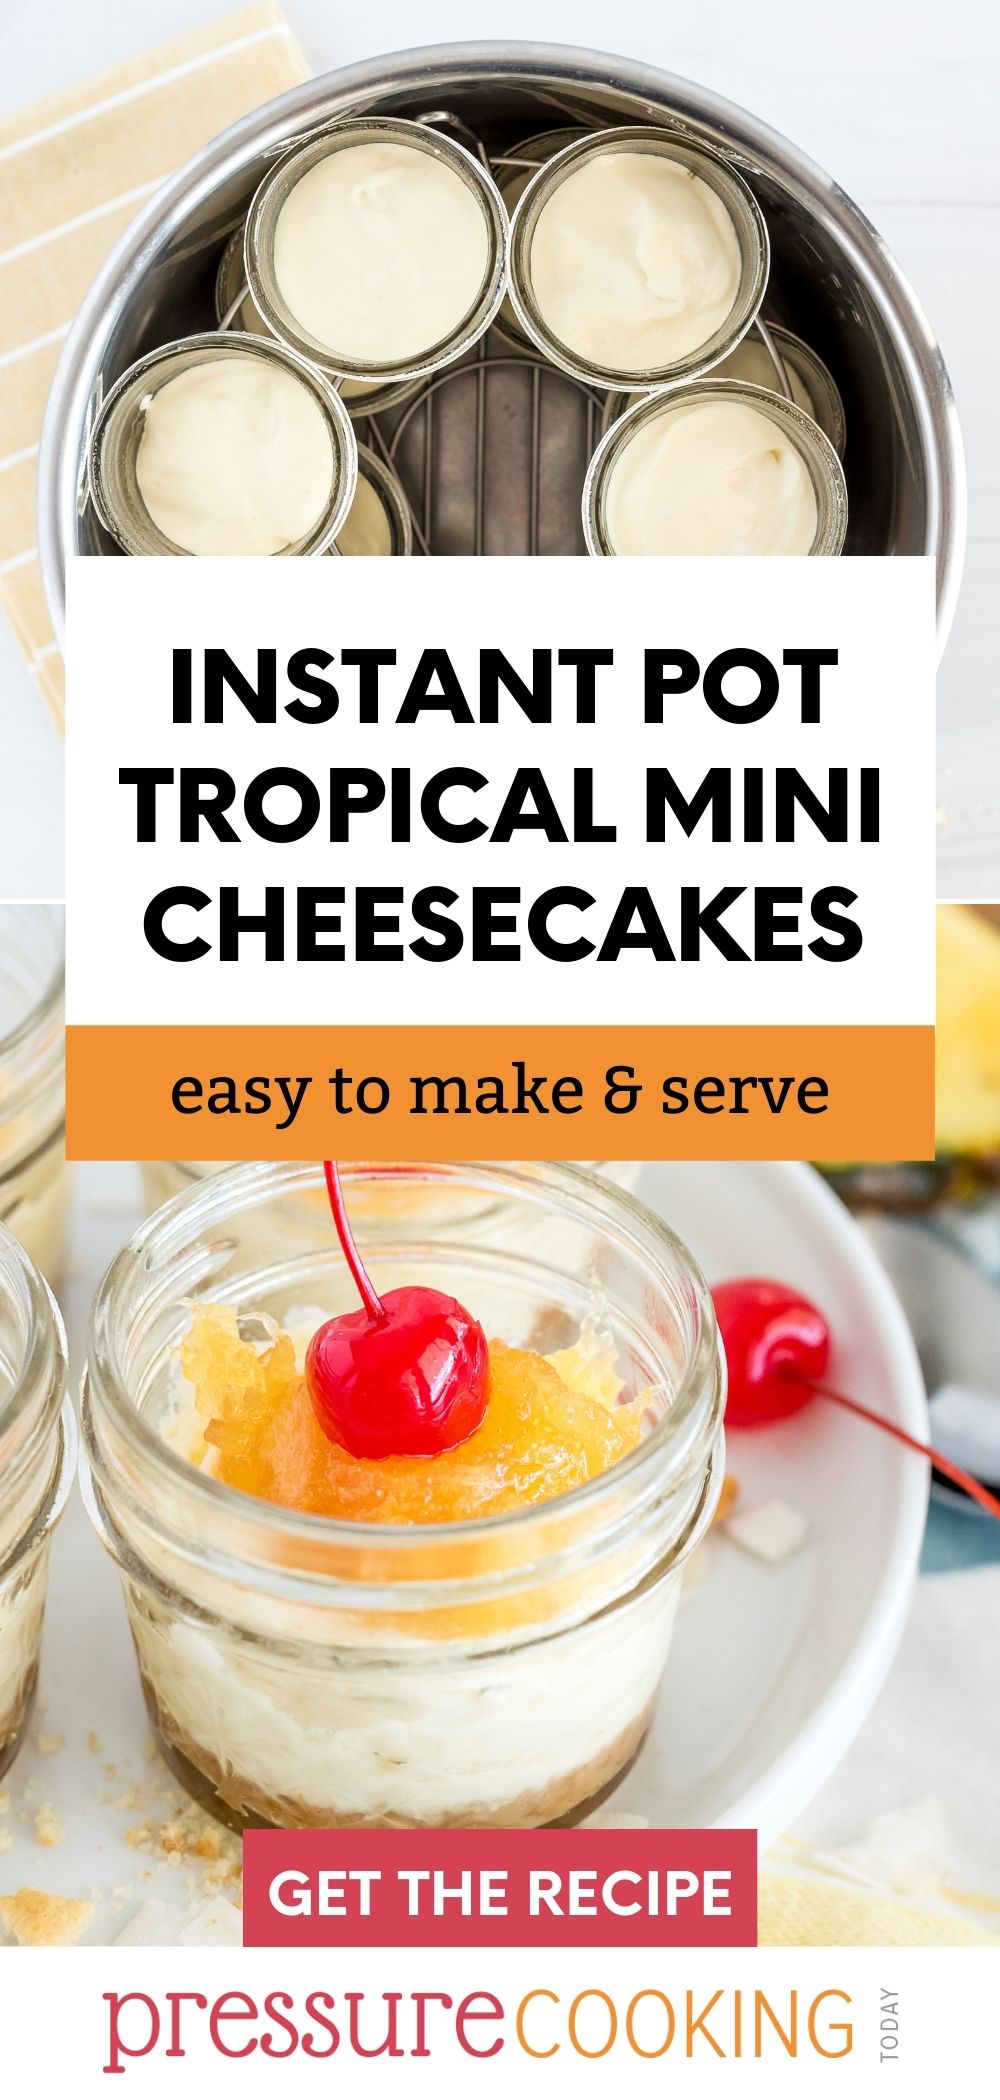 Pinterest Image that reads "Instant Pot Tropical mini Cheesecakes: Easy to Make & Serve" with a top image featuring mini cheesecakes in the Instant Pot and a dished up version in a mini mason jar on bottom via @PressureCook2da